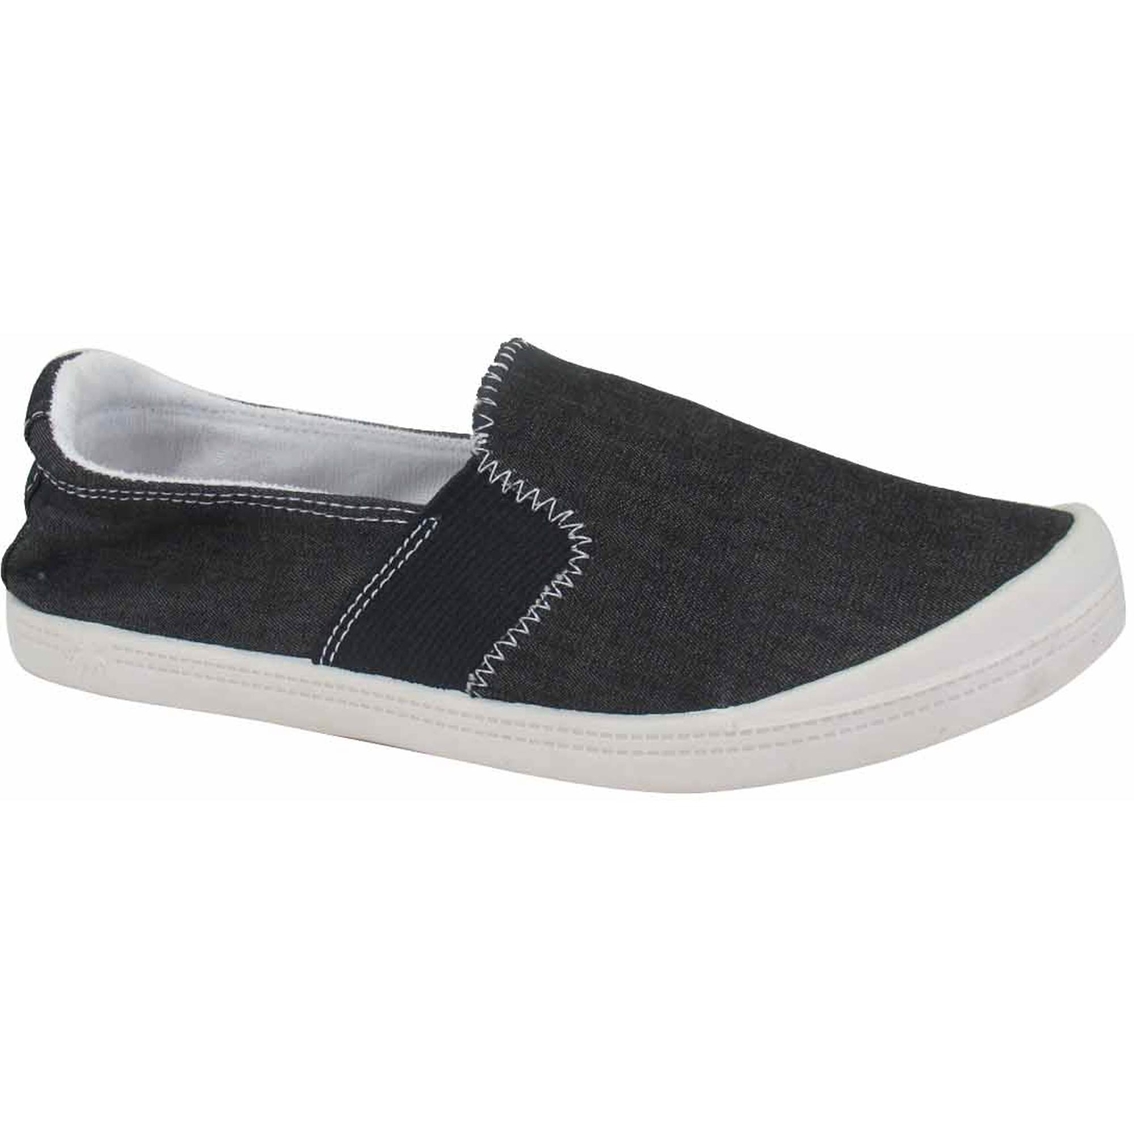 Jellypop Coney Slip On Sneakers | Sneakers | Shoes | Shop The Exchange